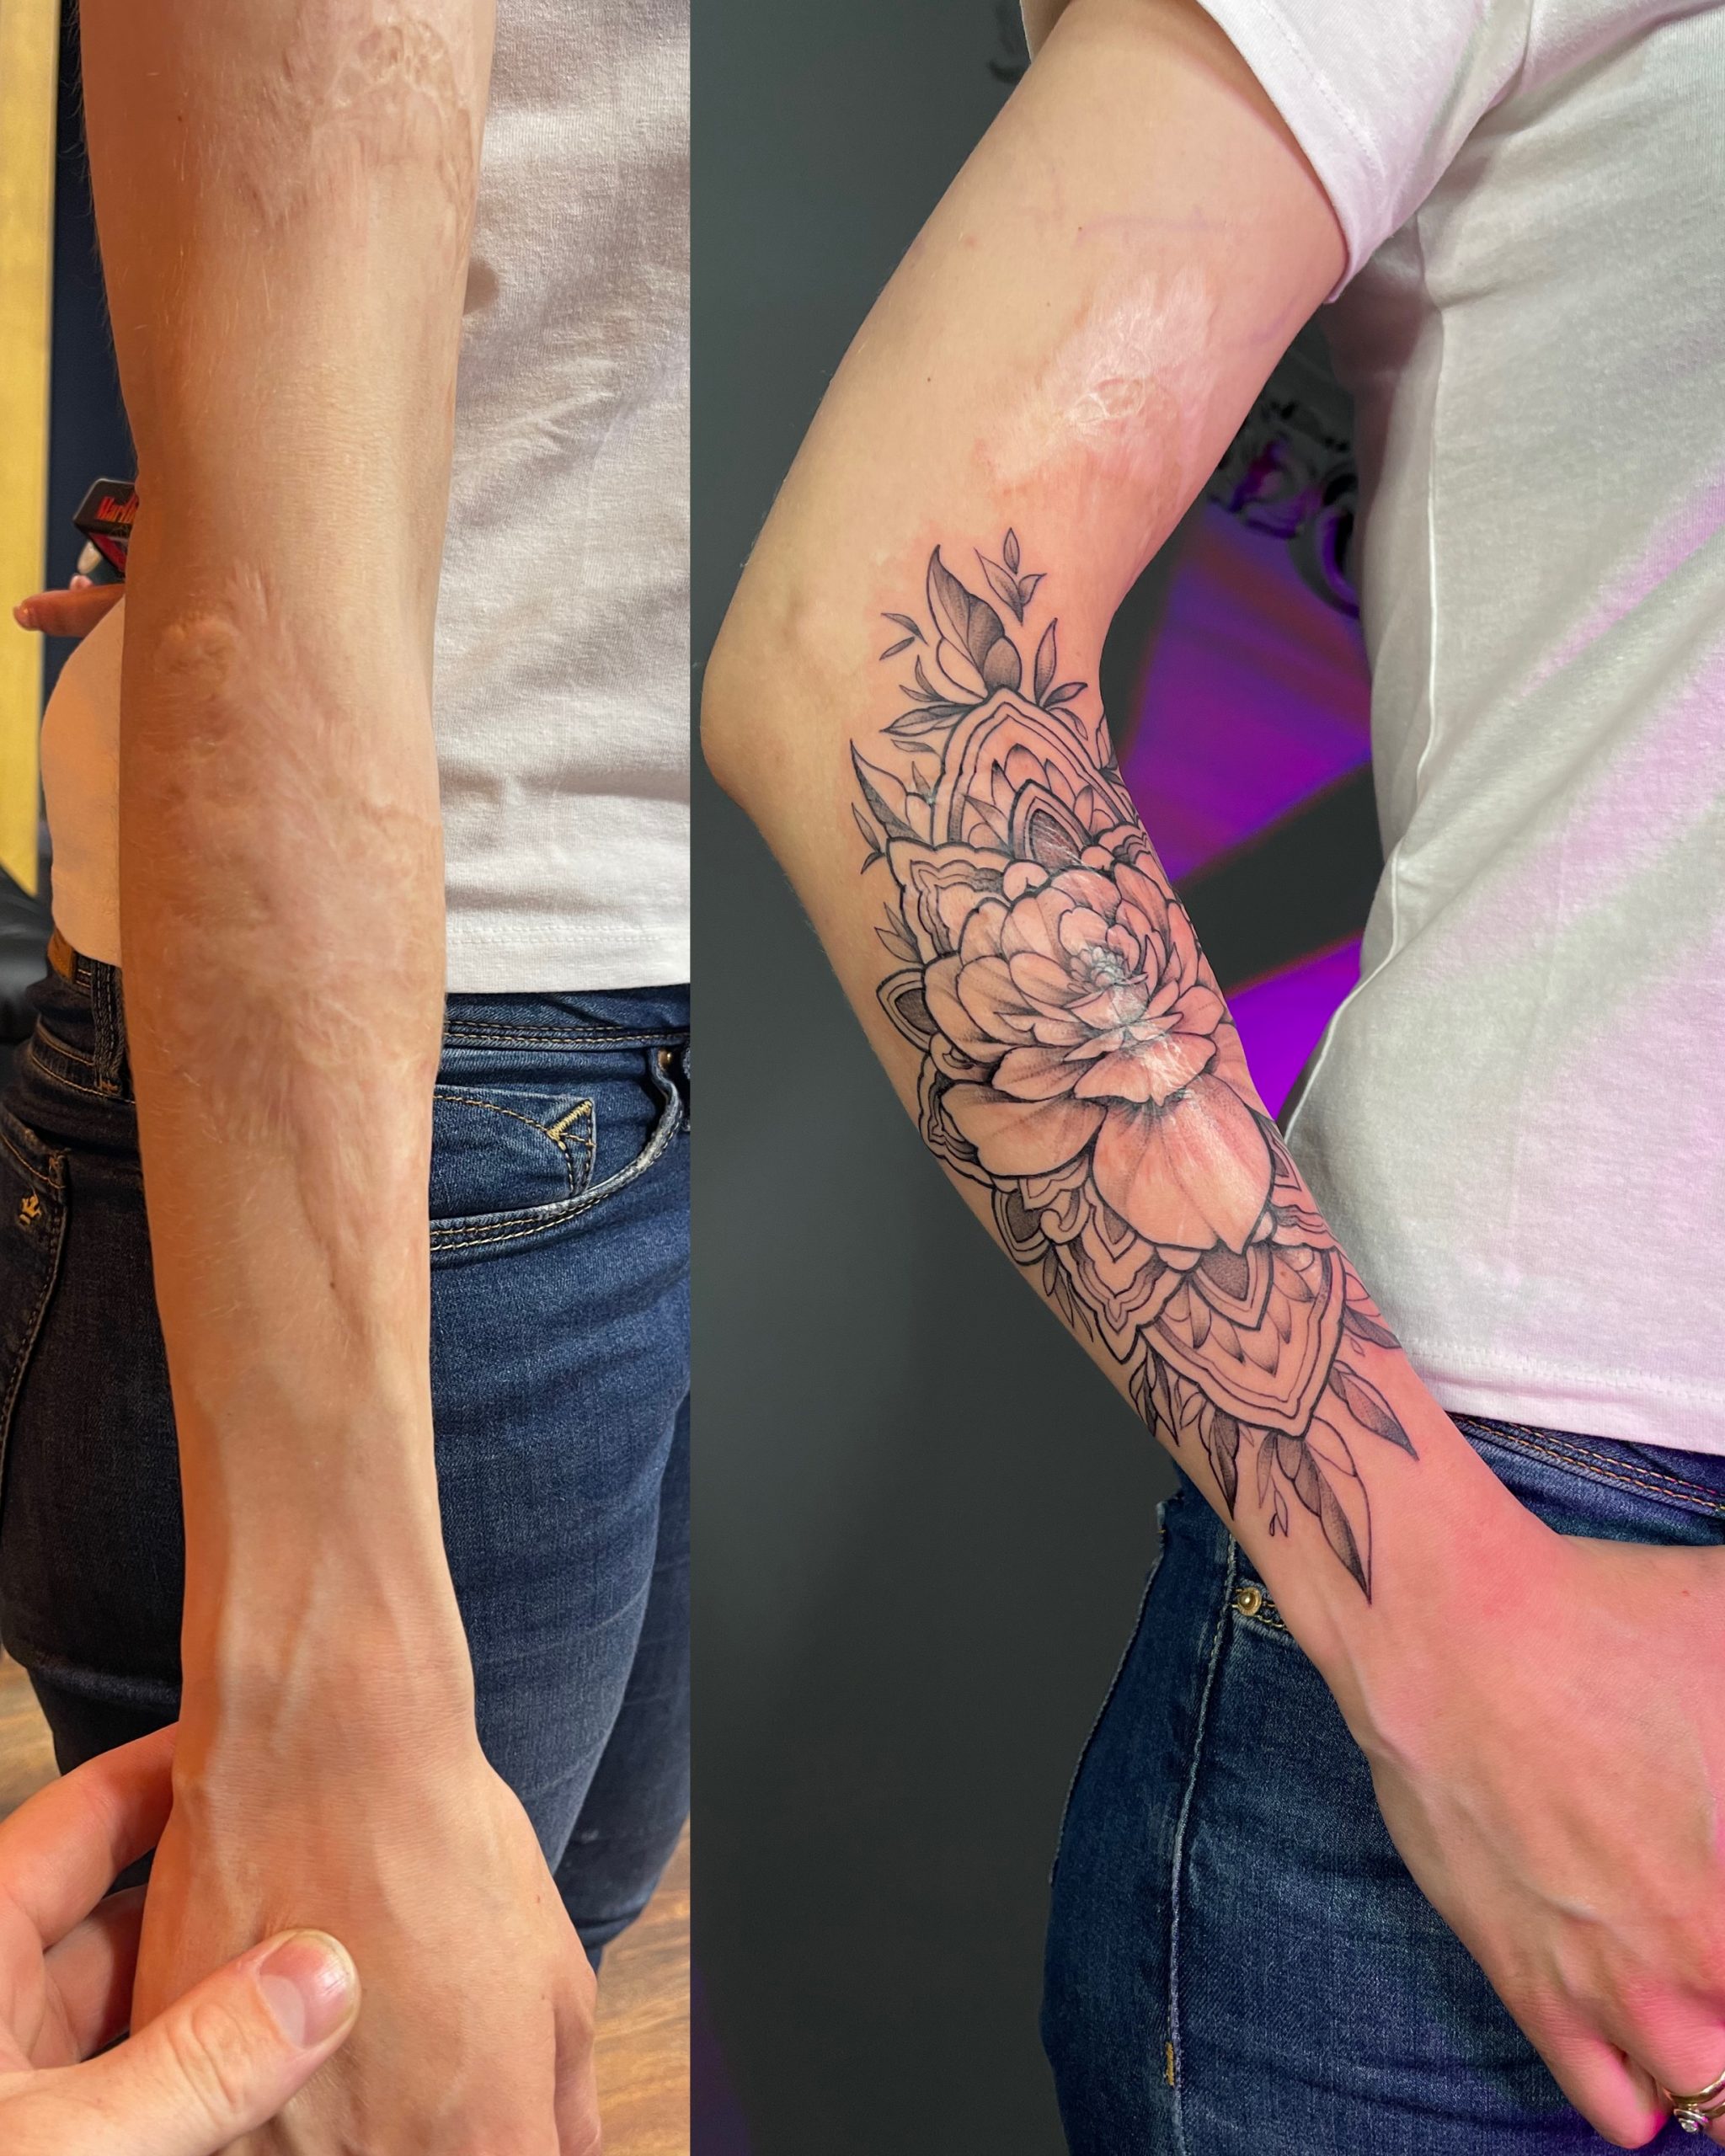 Tattoos i've done | Gallery posted by abigail murphy | Lemon8